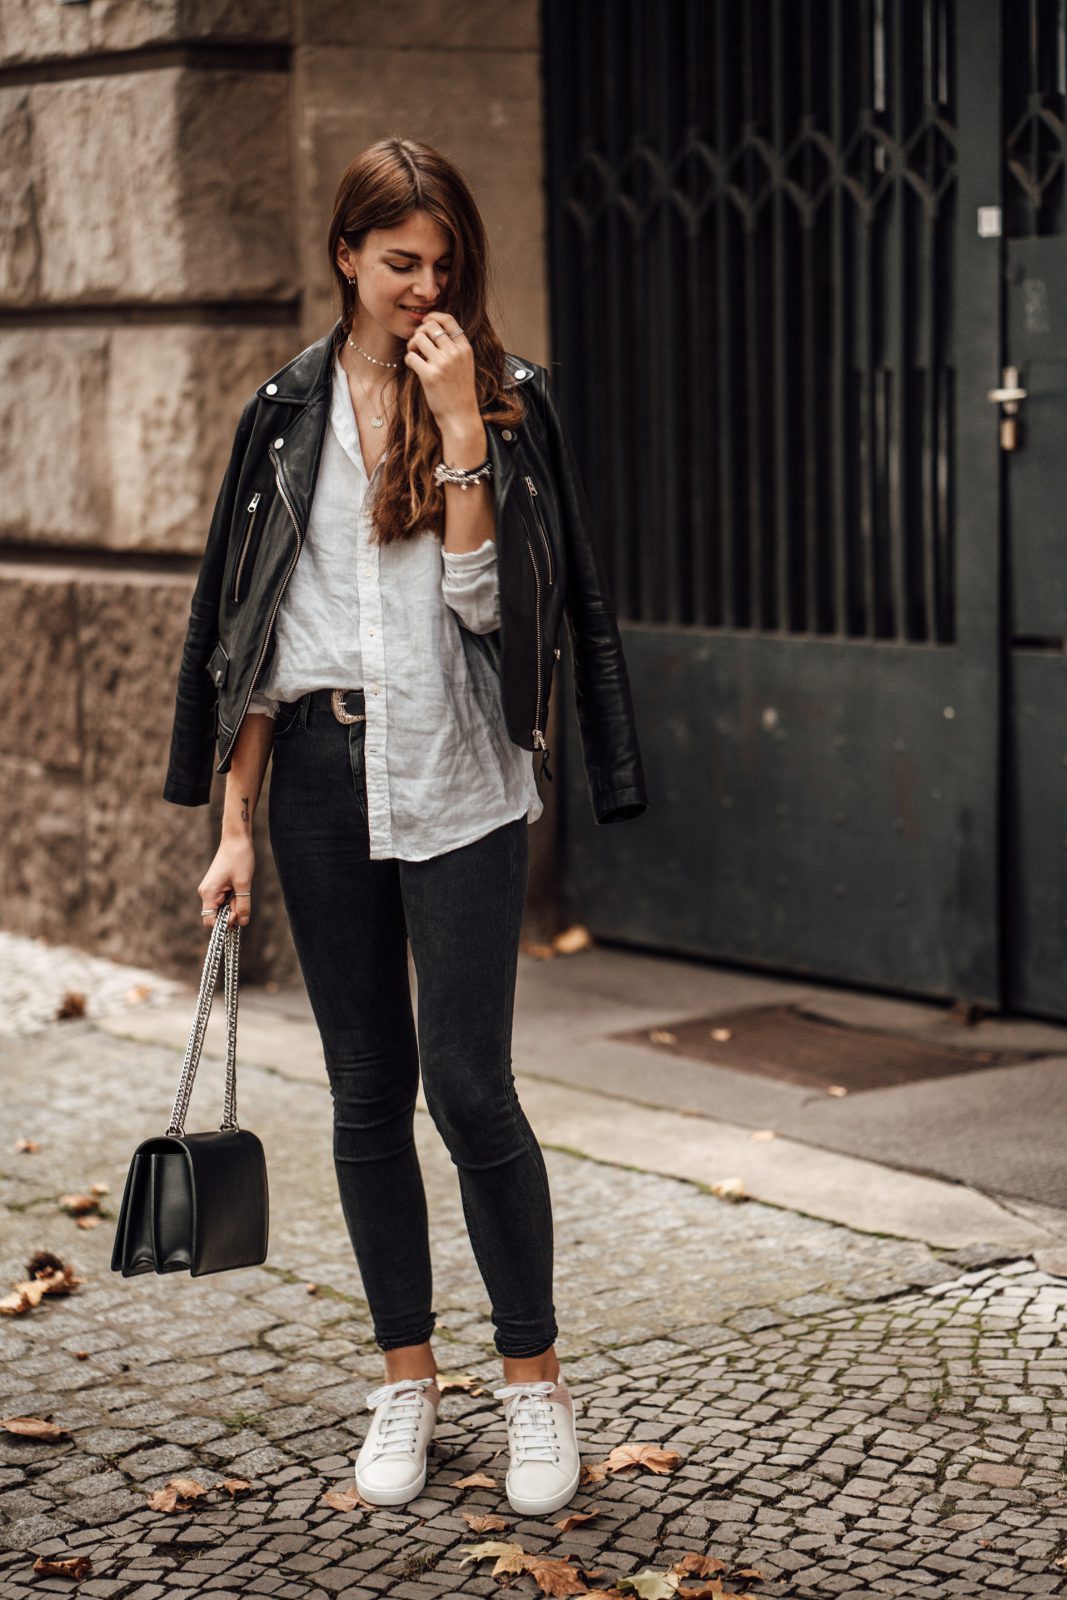 Woman's Outfit Idea: Leather Jacket and White Shirt || Casual Chic Outfit